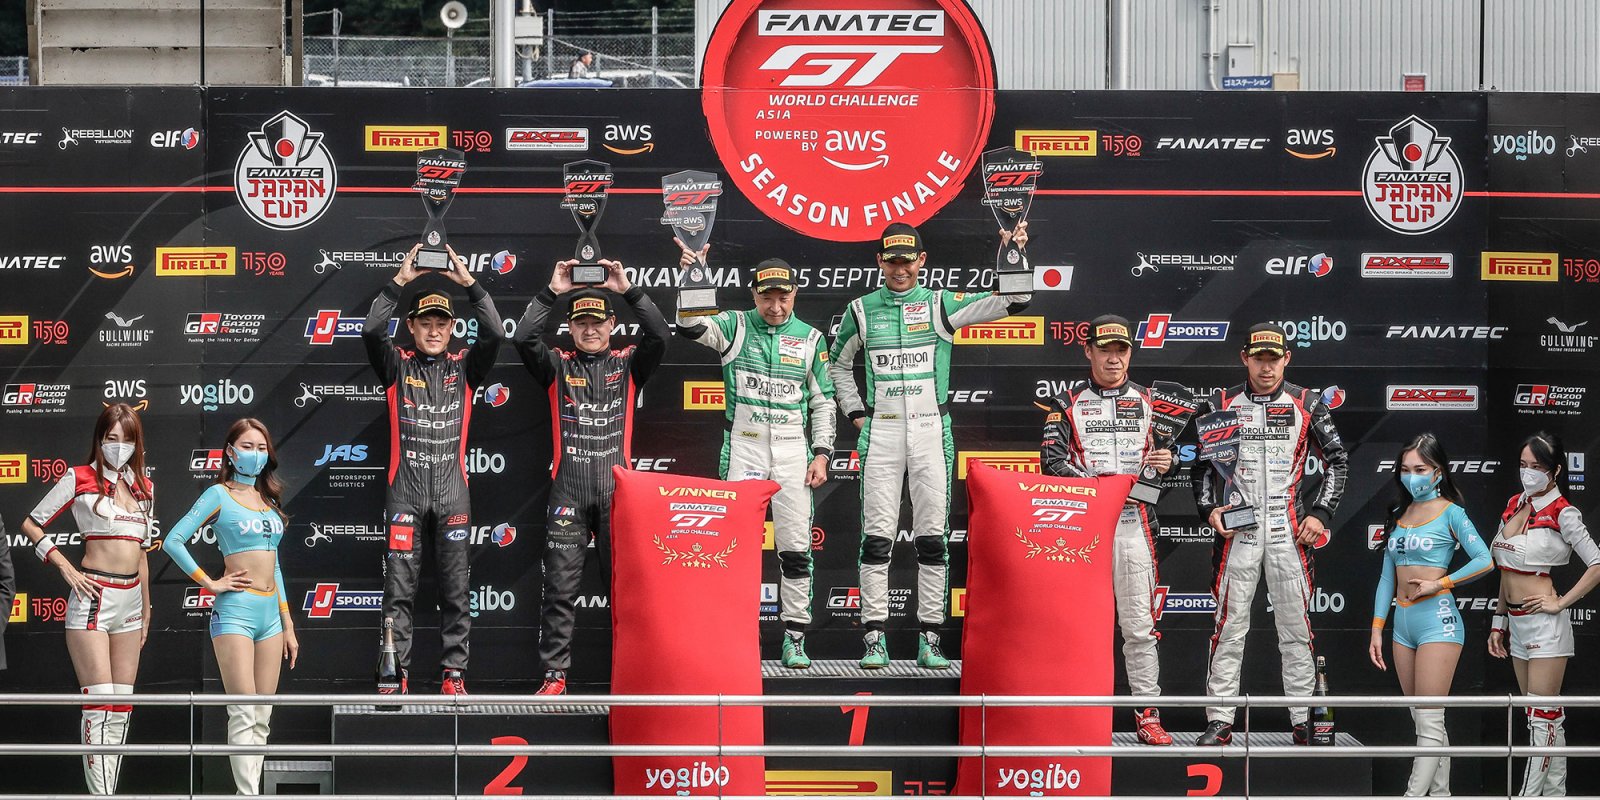 Fanatec GT World Challenge Asia Powered by AWS Image